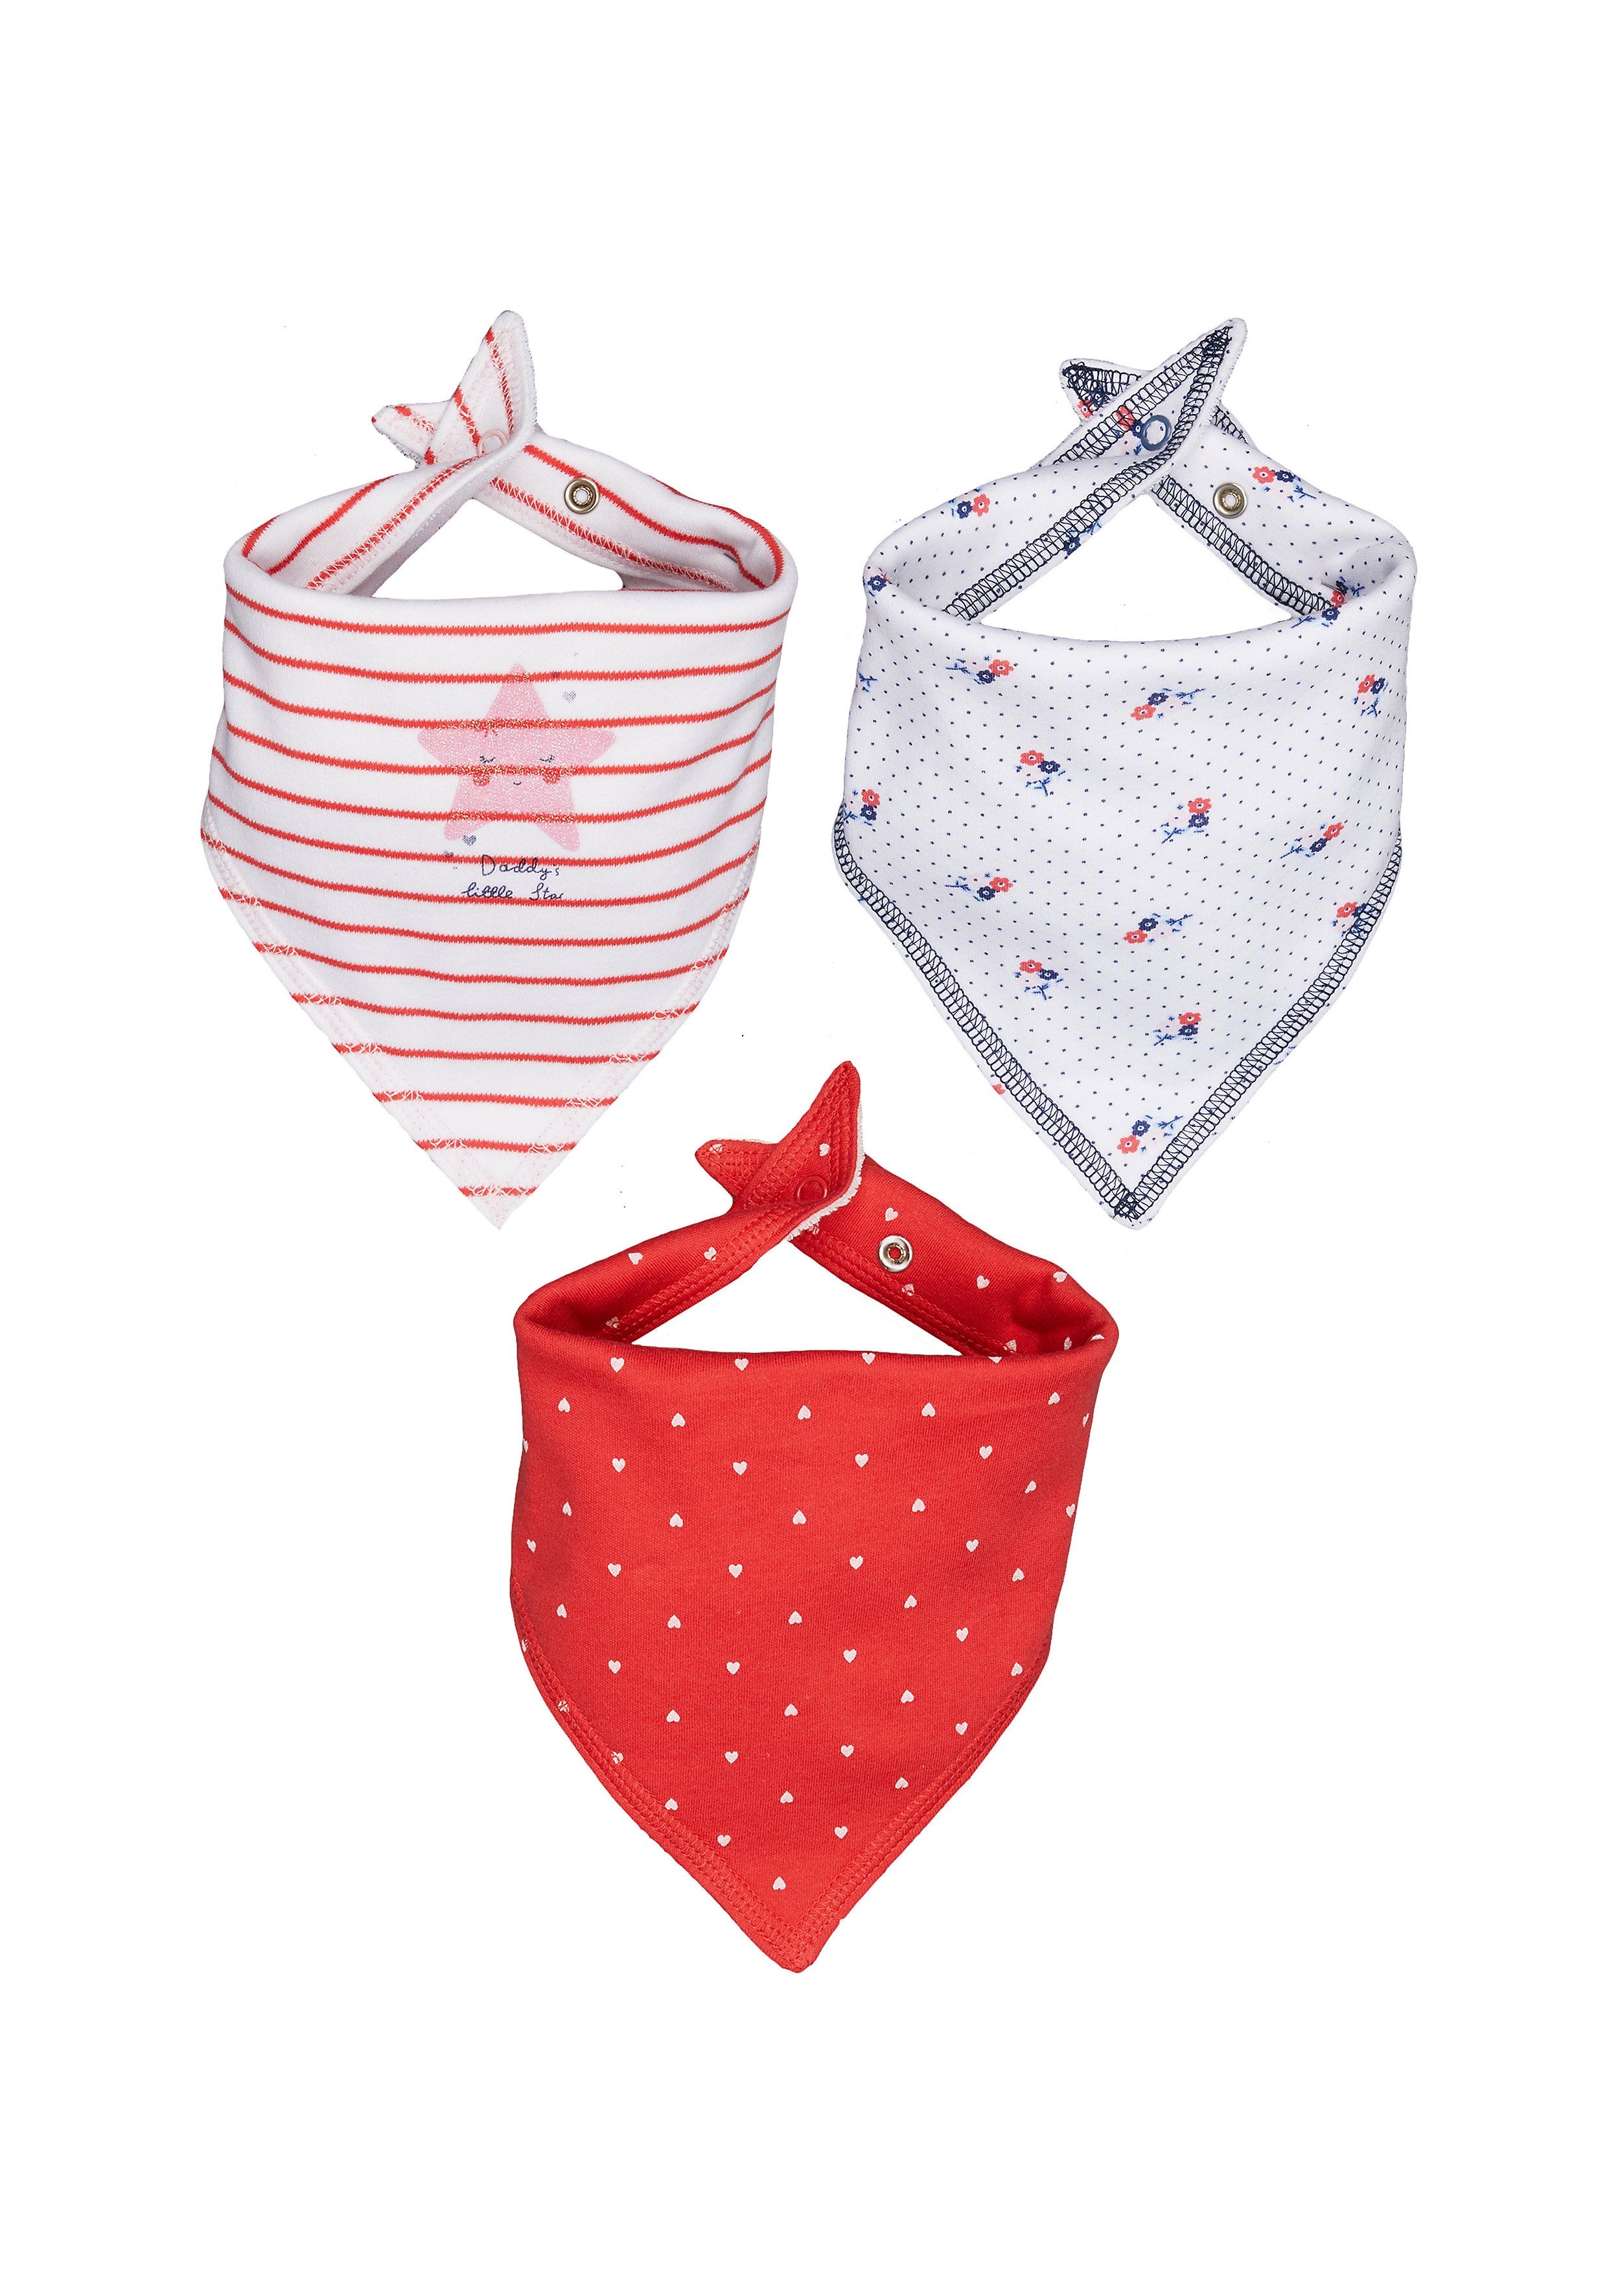 White and Red Printed Bibs - Pack of 3